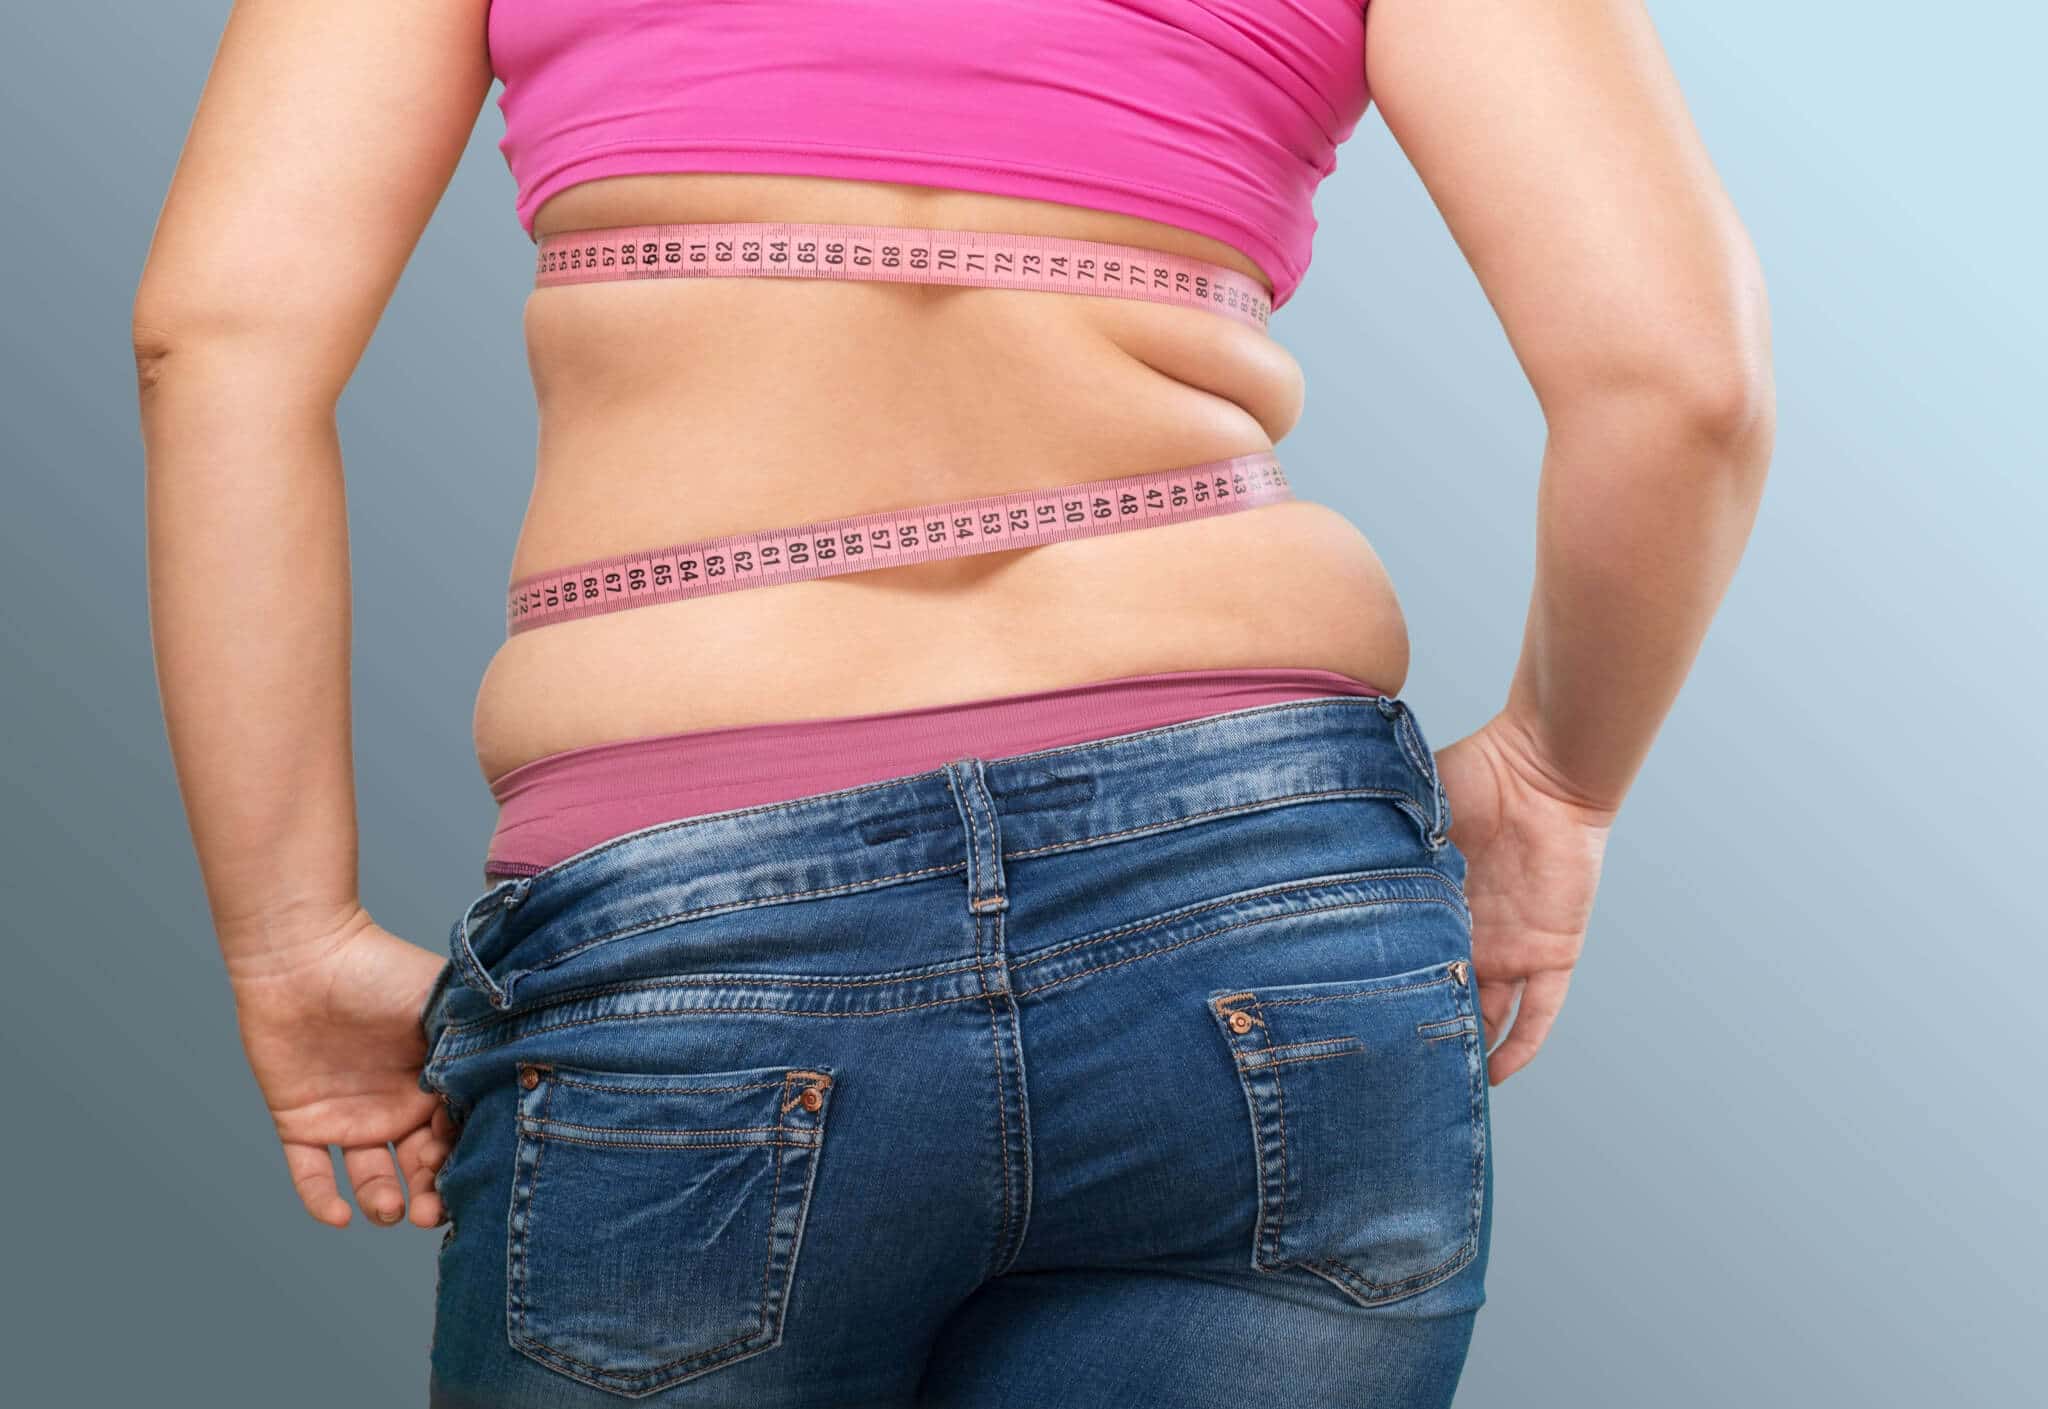 What is back fat and how can you hide it?